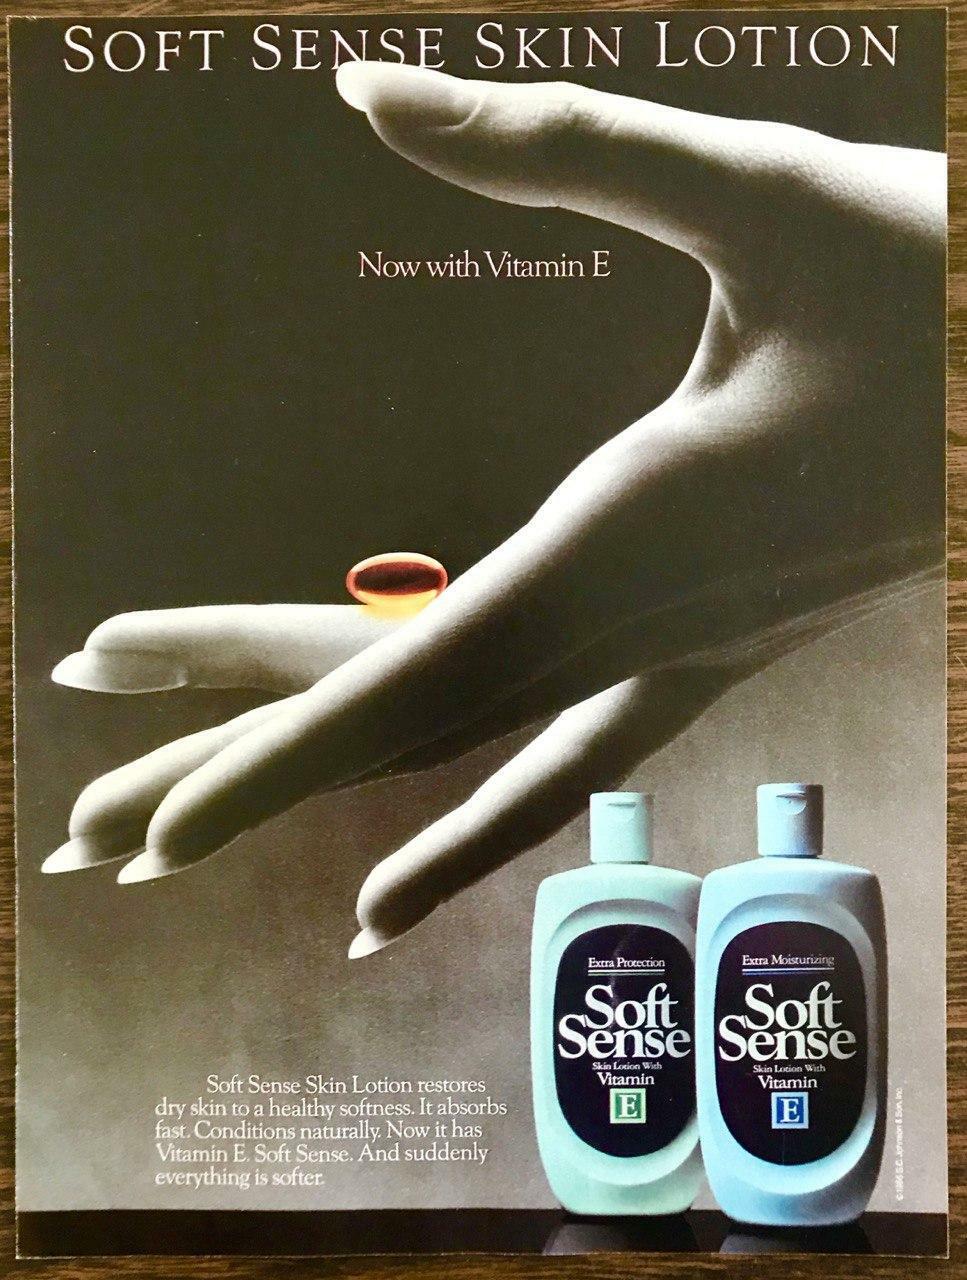 1986 Soft Sense Skin Lotion PRINT AD Vitamin E Suddenly Everything is Softer